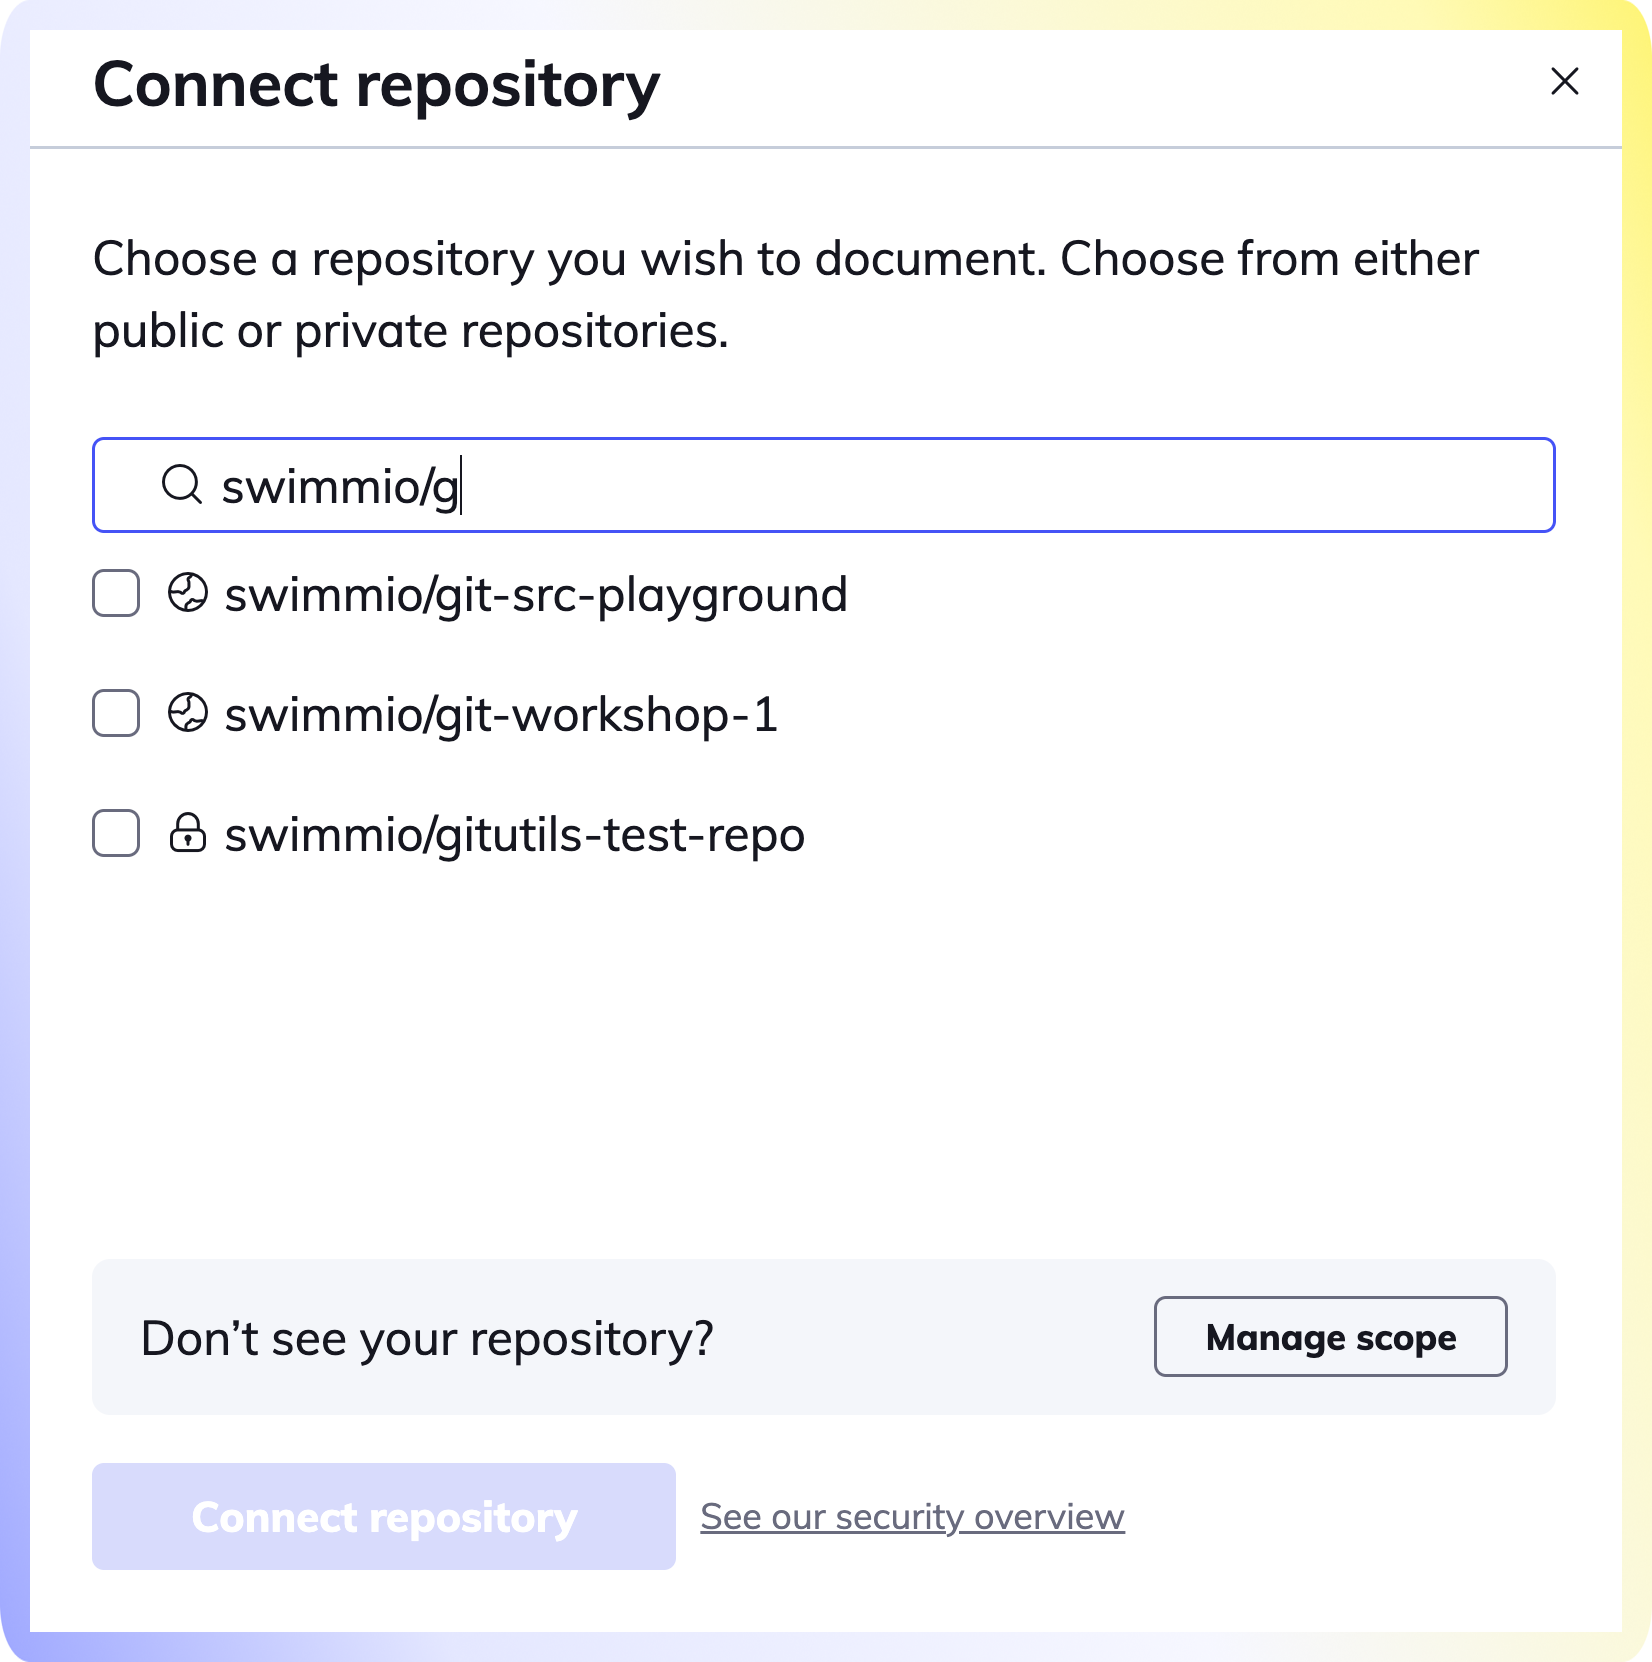 Add repositories to your workspace